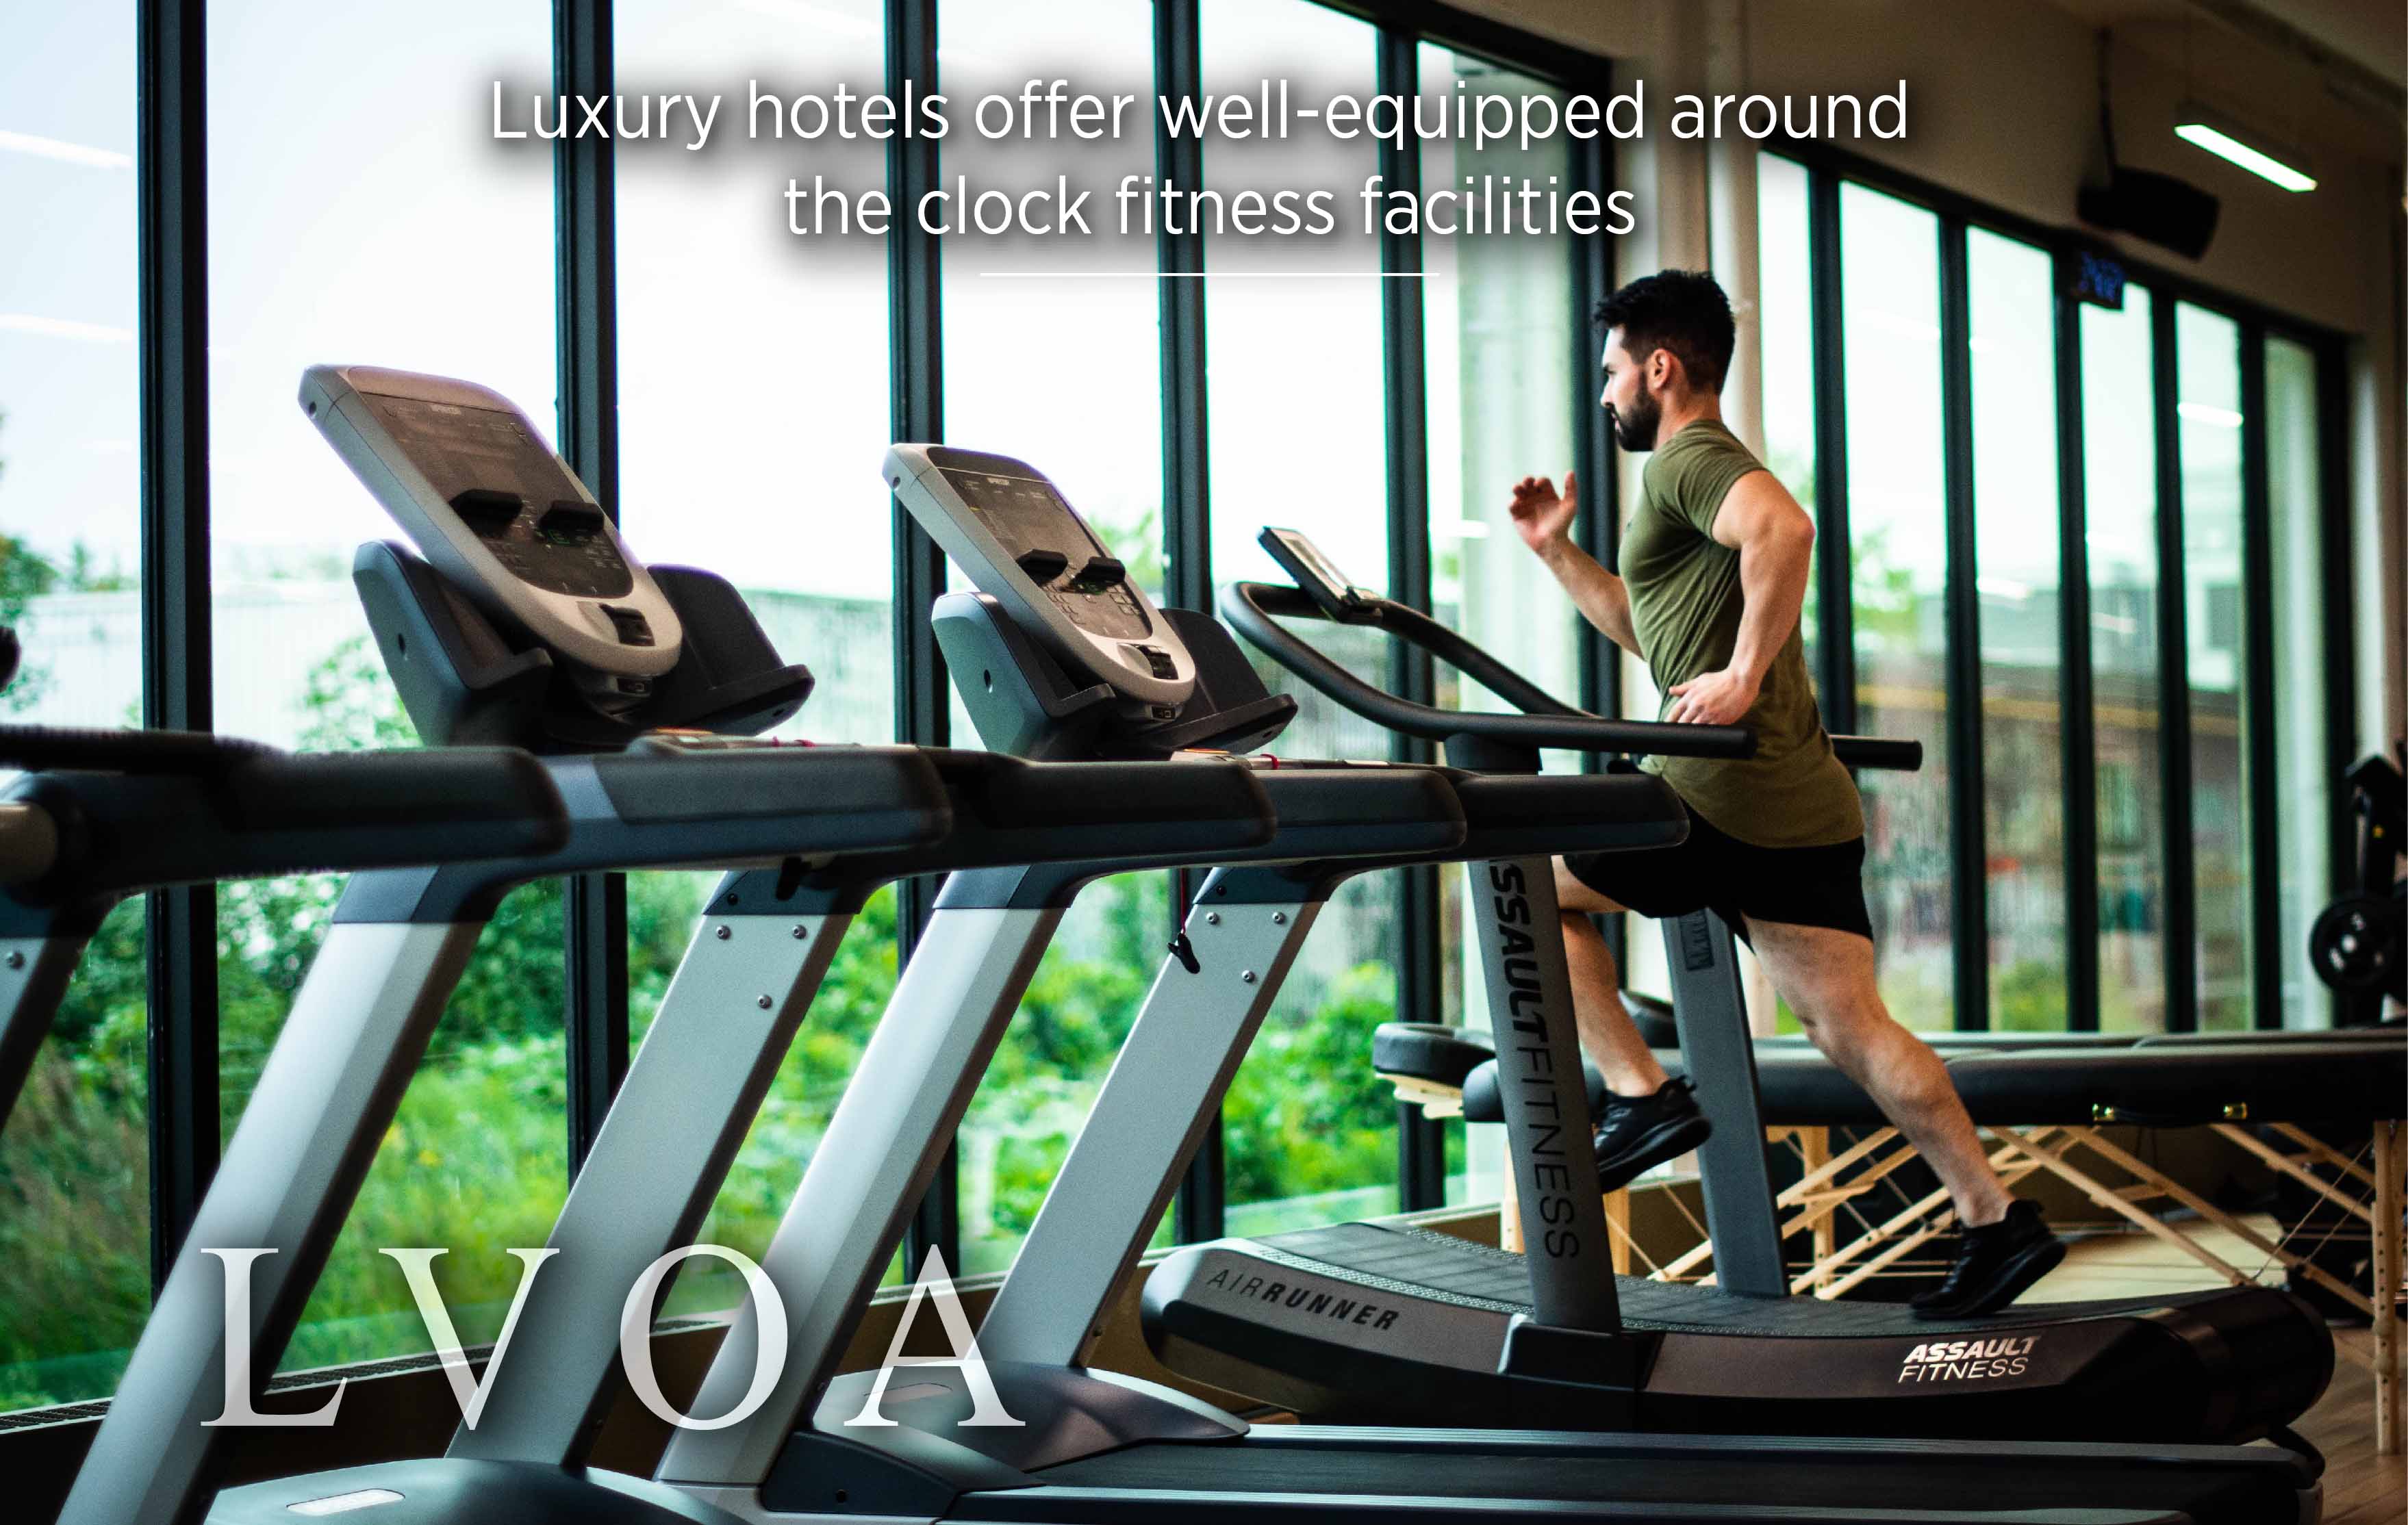 Luxury hotels offer well-equipped around the clock fitness facilities_LVO_Associates